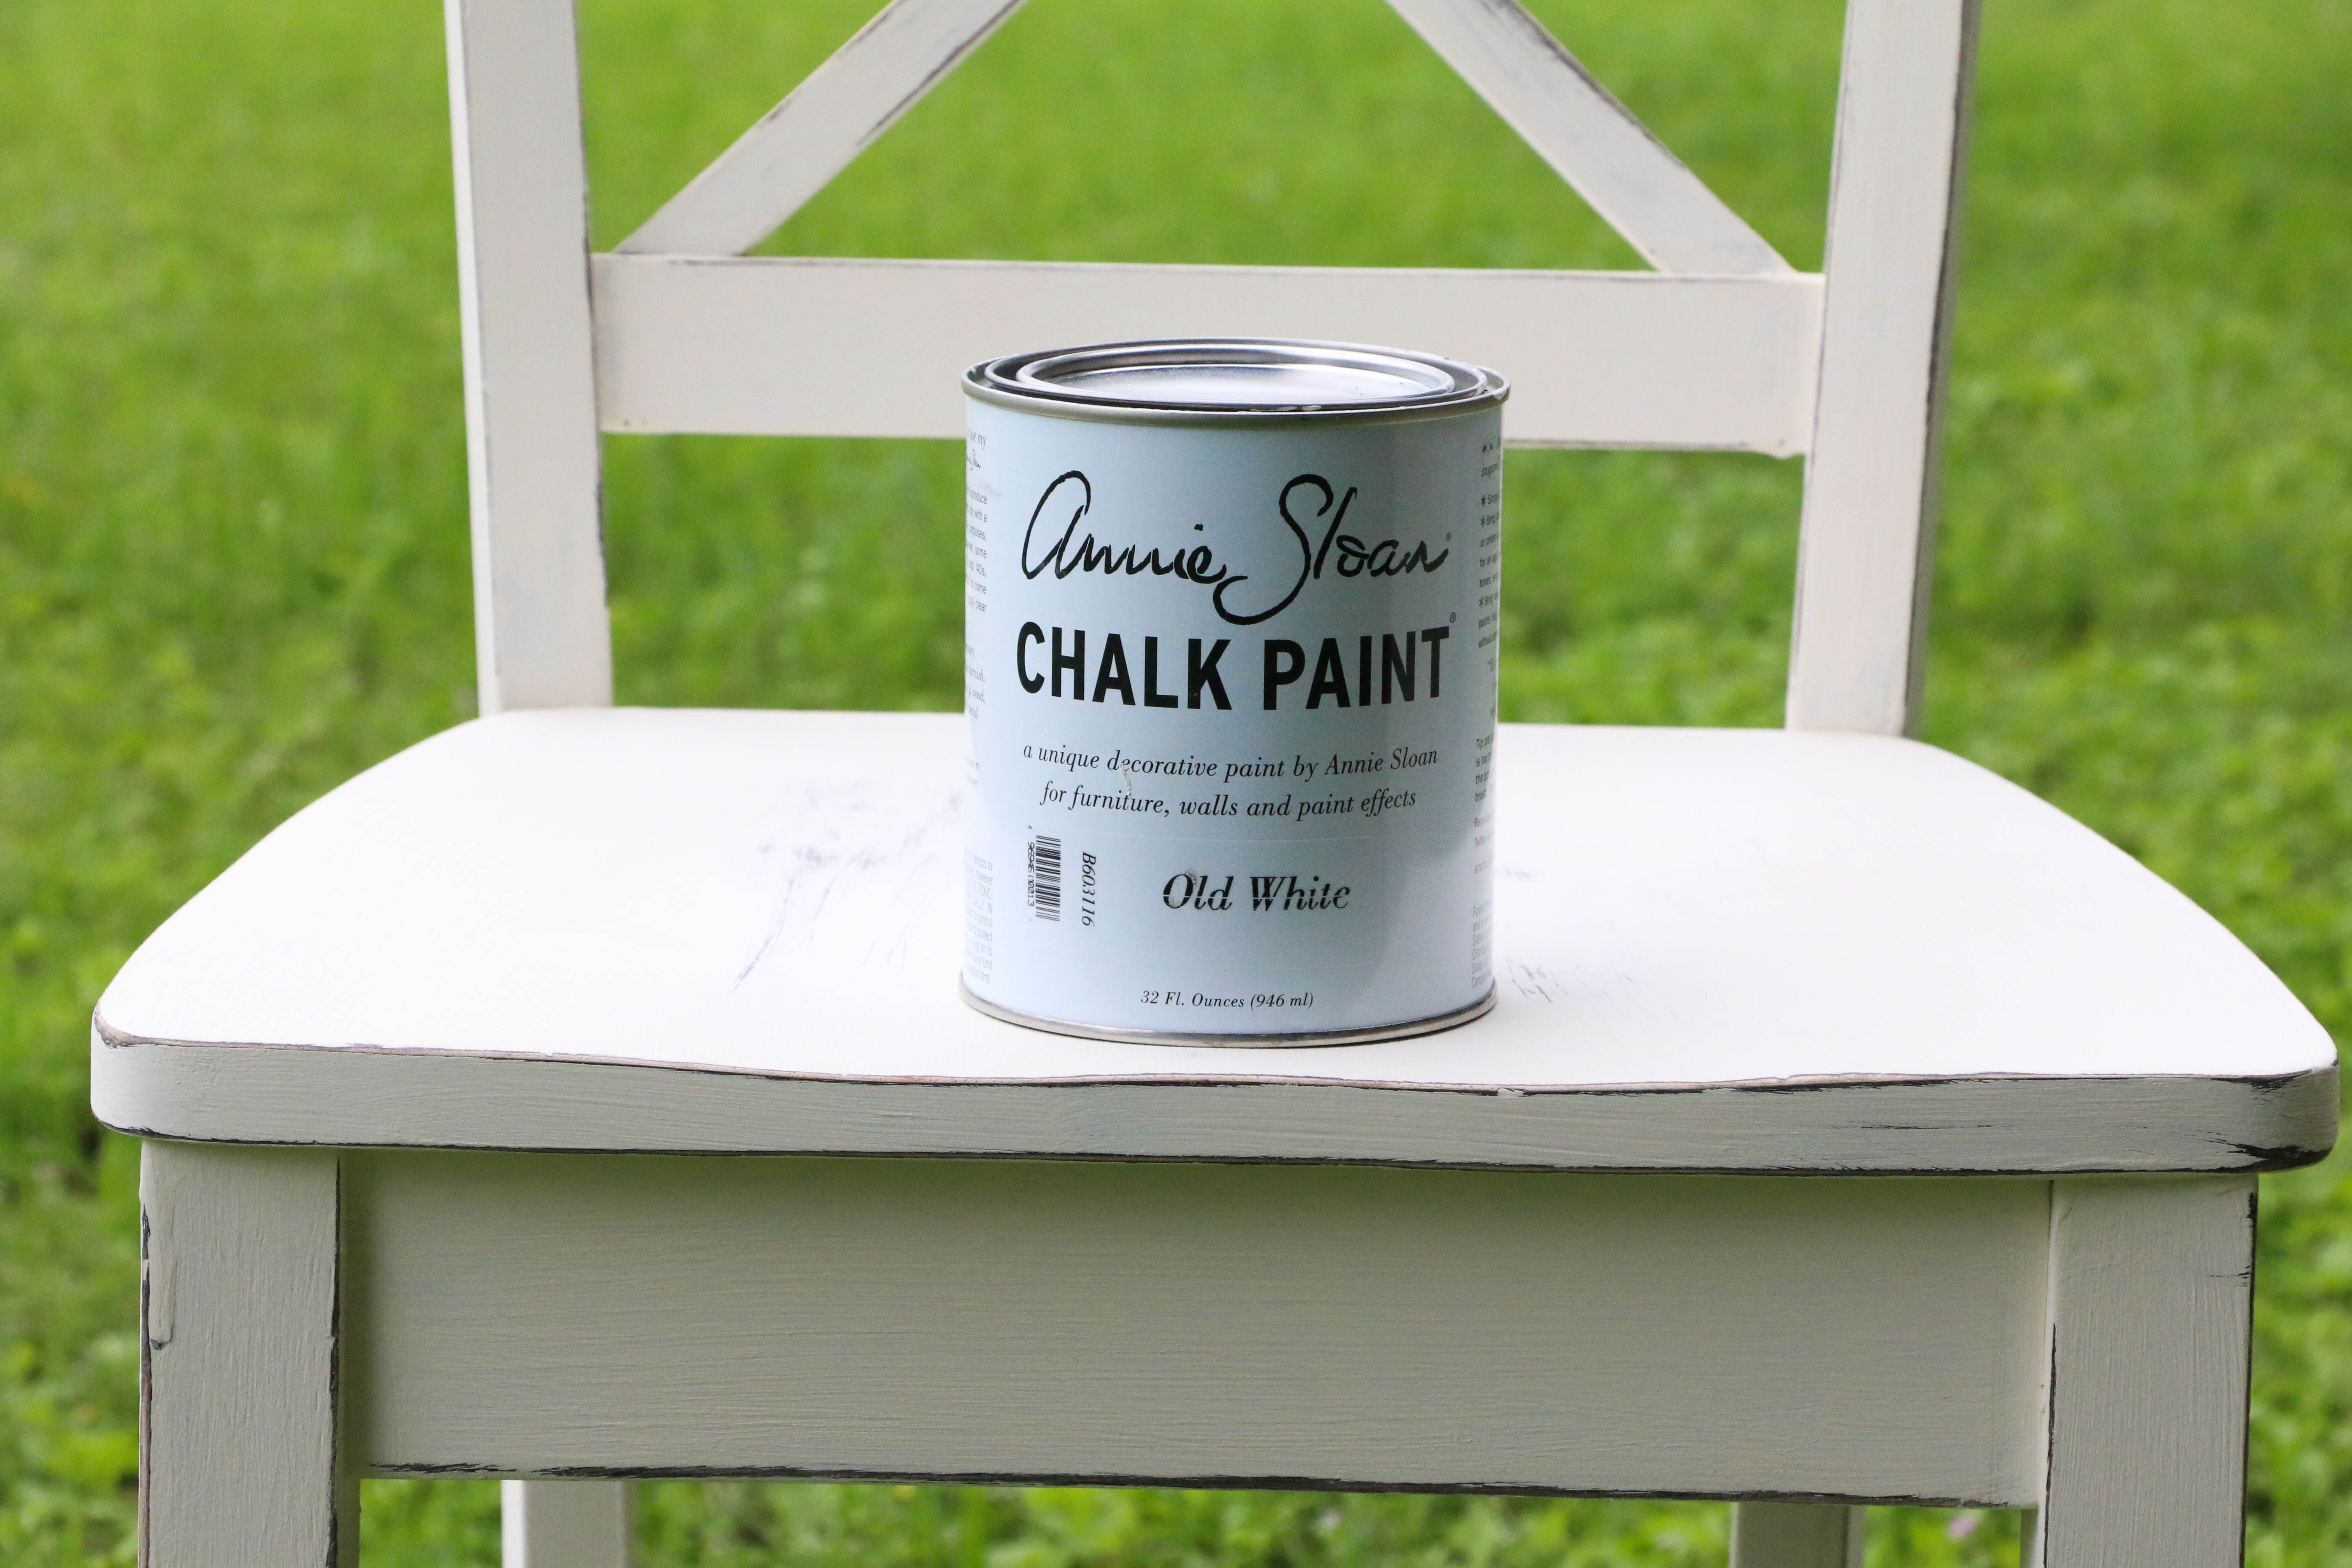 cottage instincts: ::My Honest Opinions on Chalk Paint and Wax